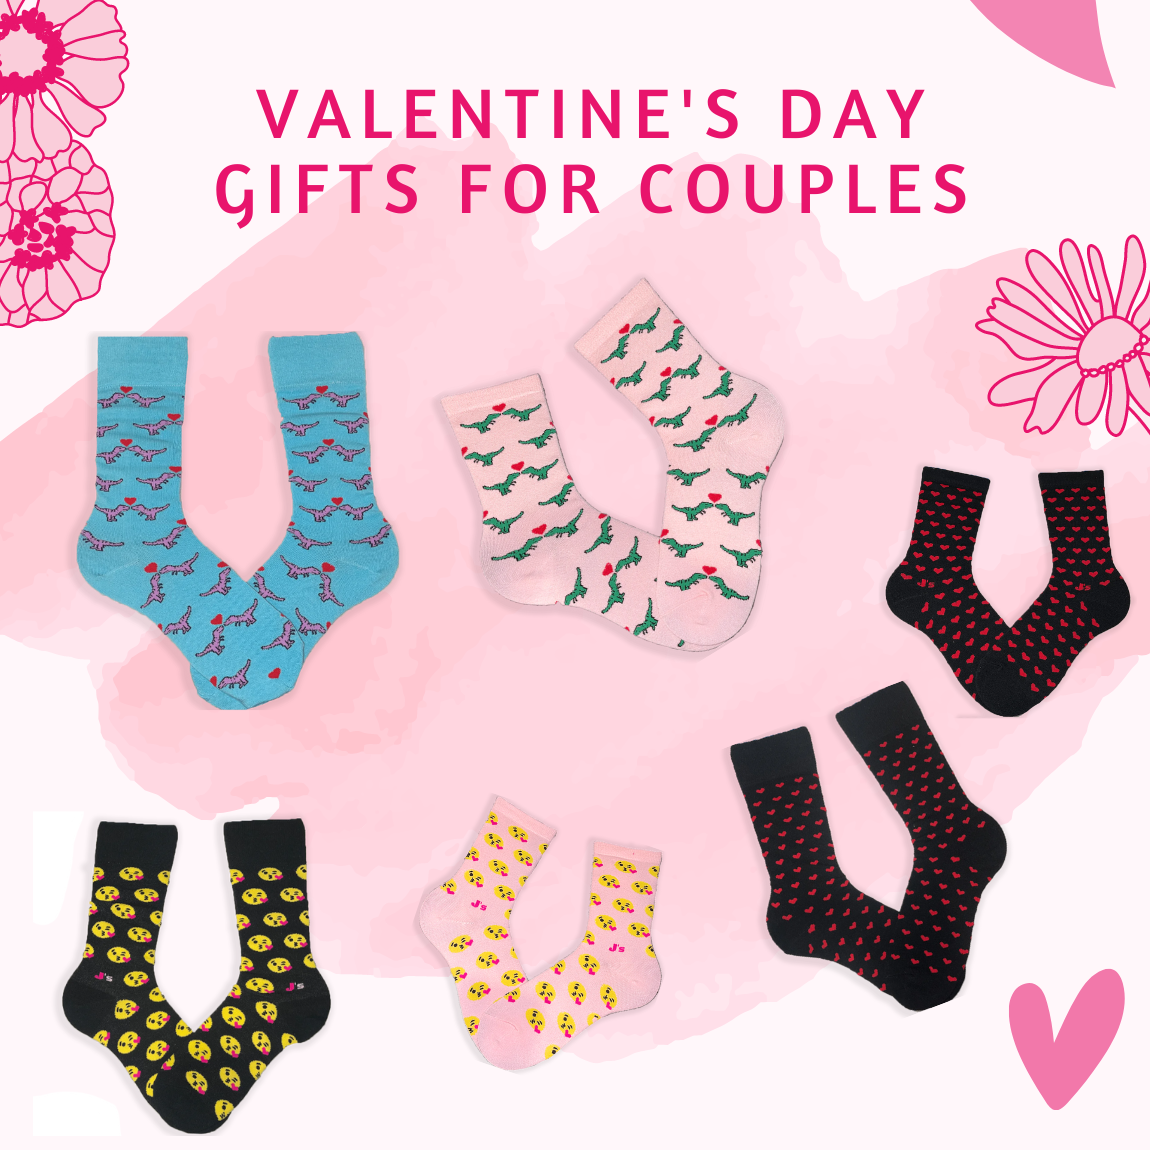 Valentine's Day Gifts For Couples | Crazy Socks